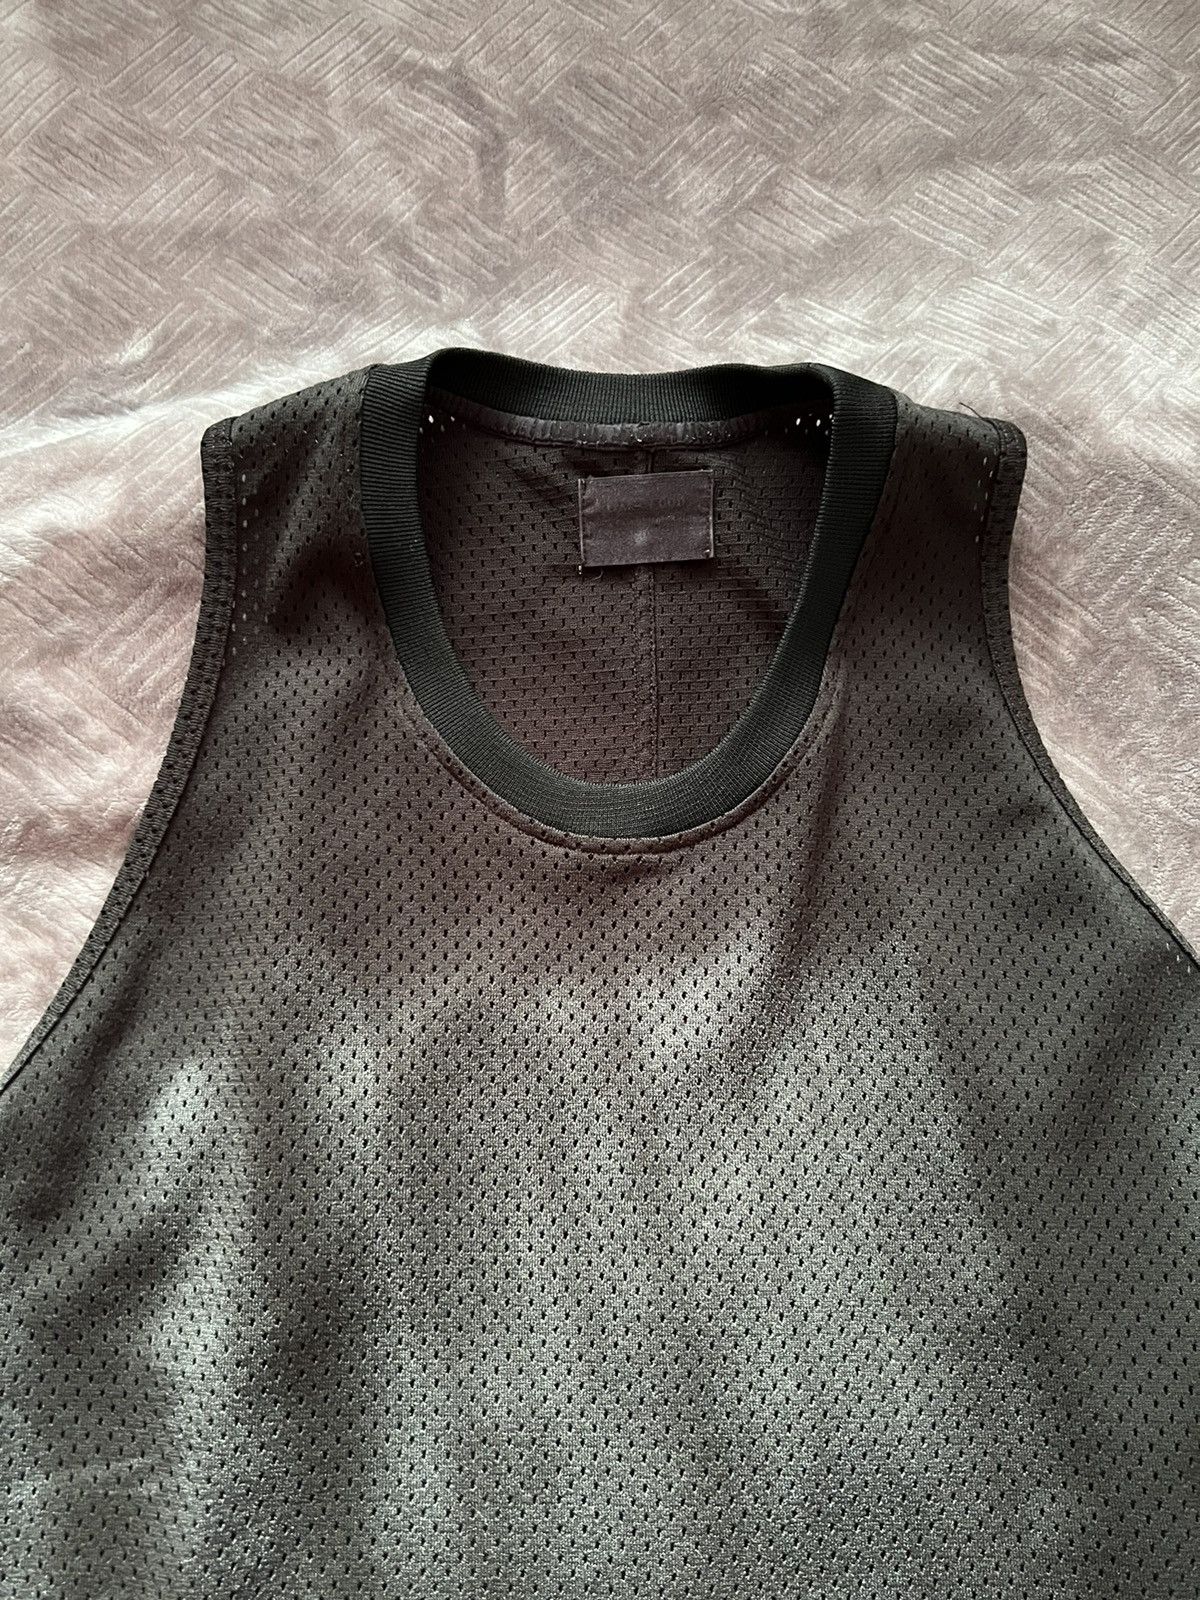 Fear of God Fear of God 5th Collection Mesh Tank | Grailed